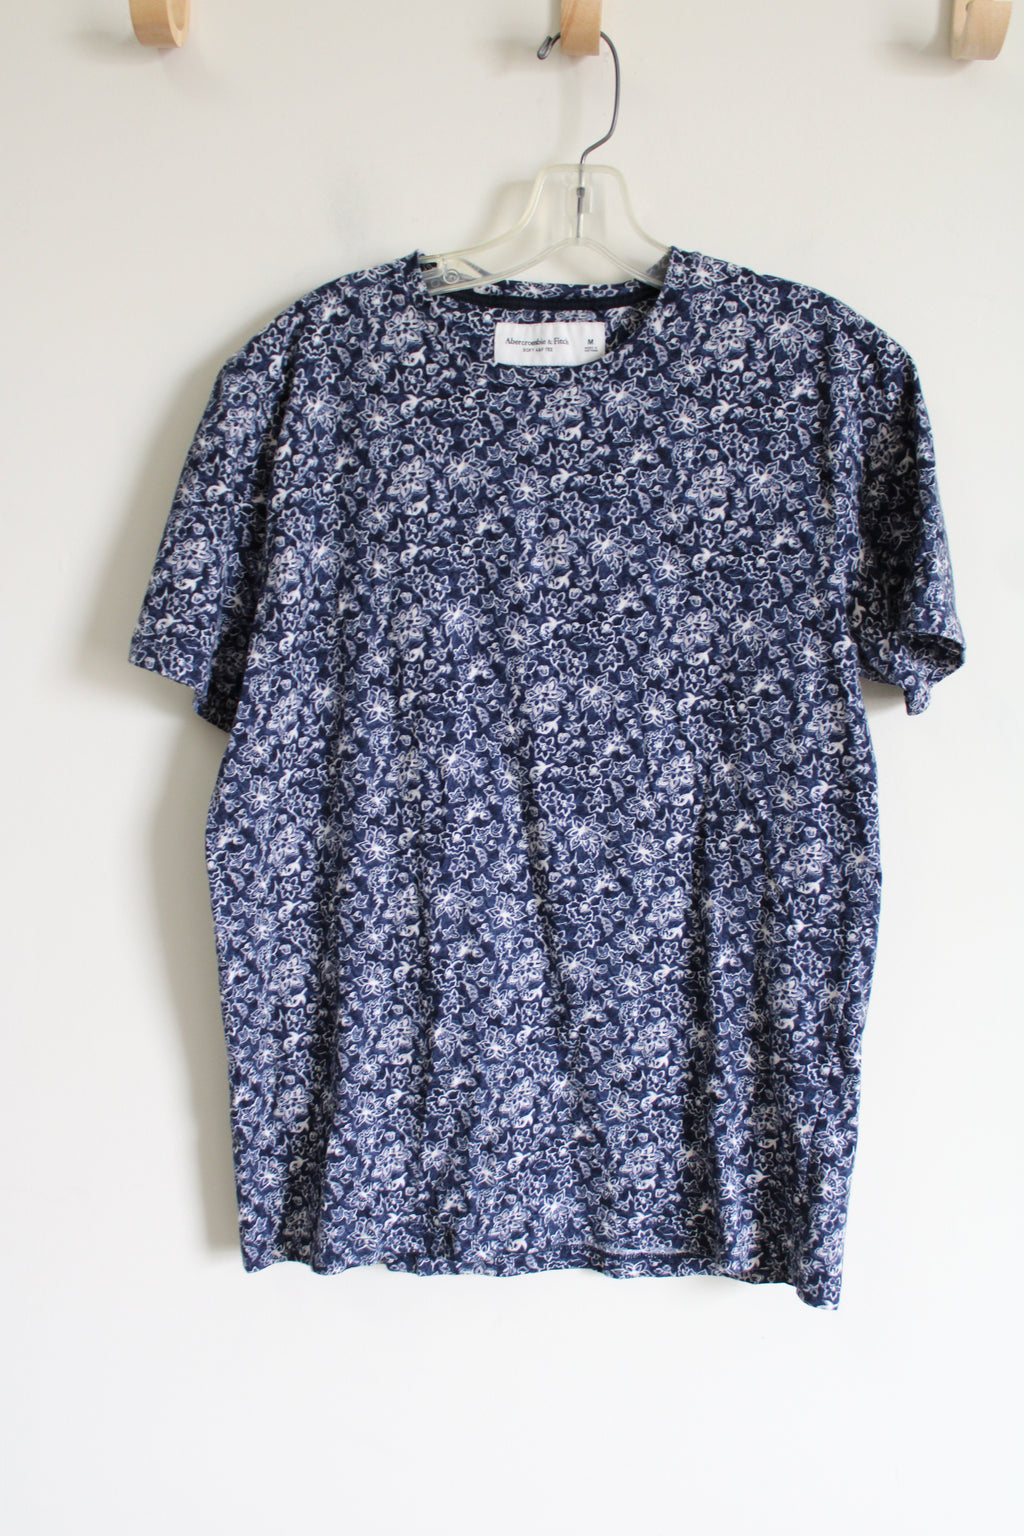 Abercrombie & Fitch Blue Floral Soft A&F Tee | M